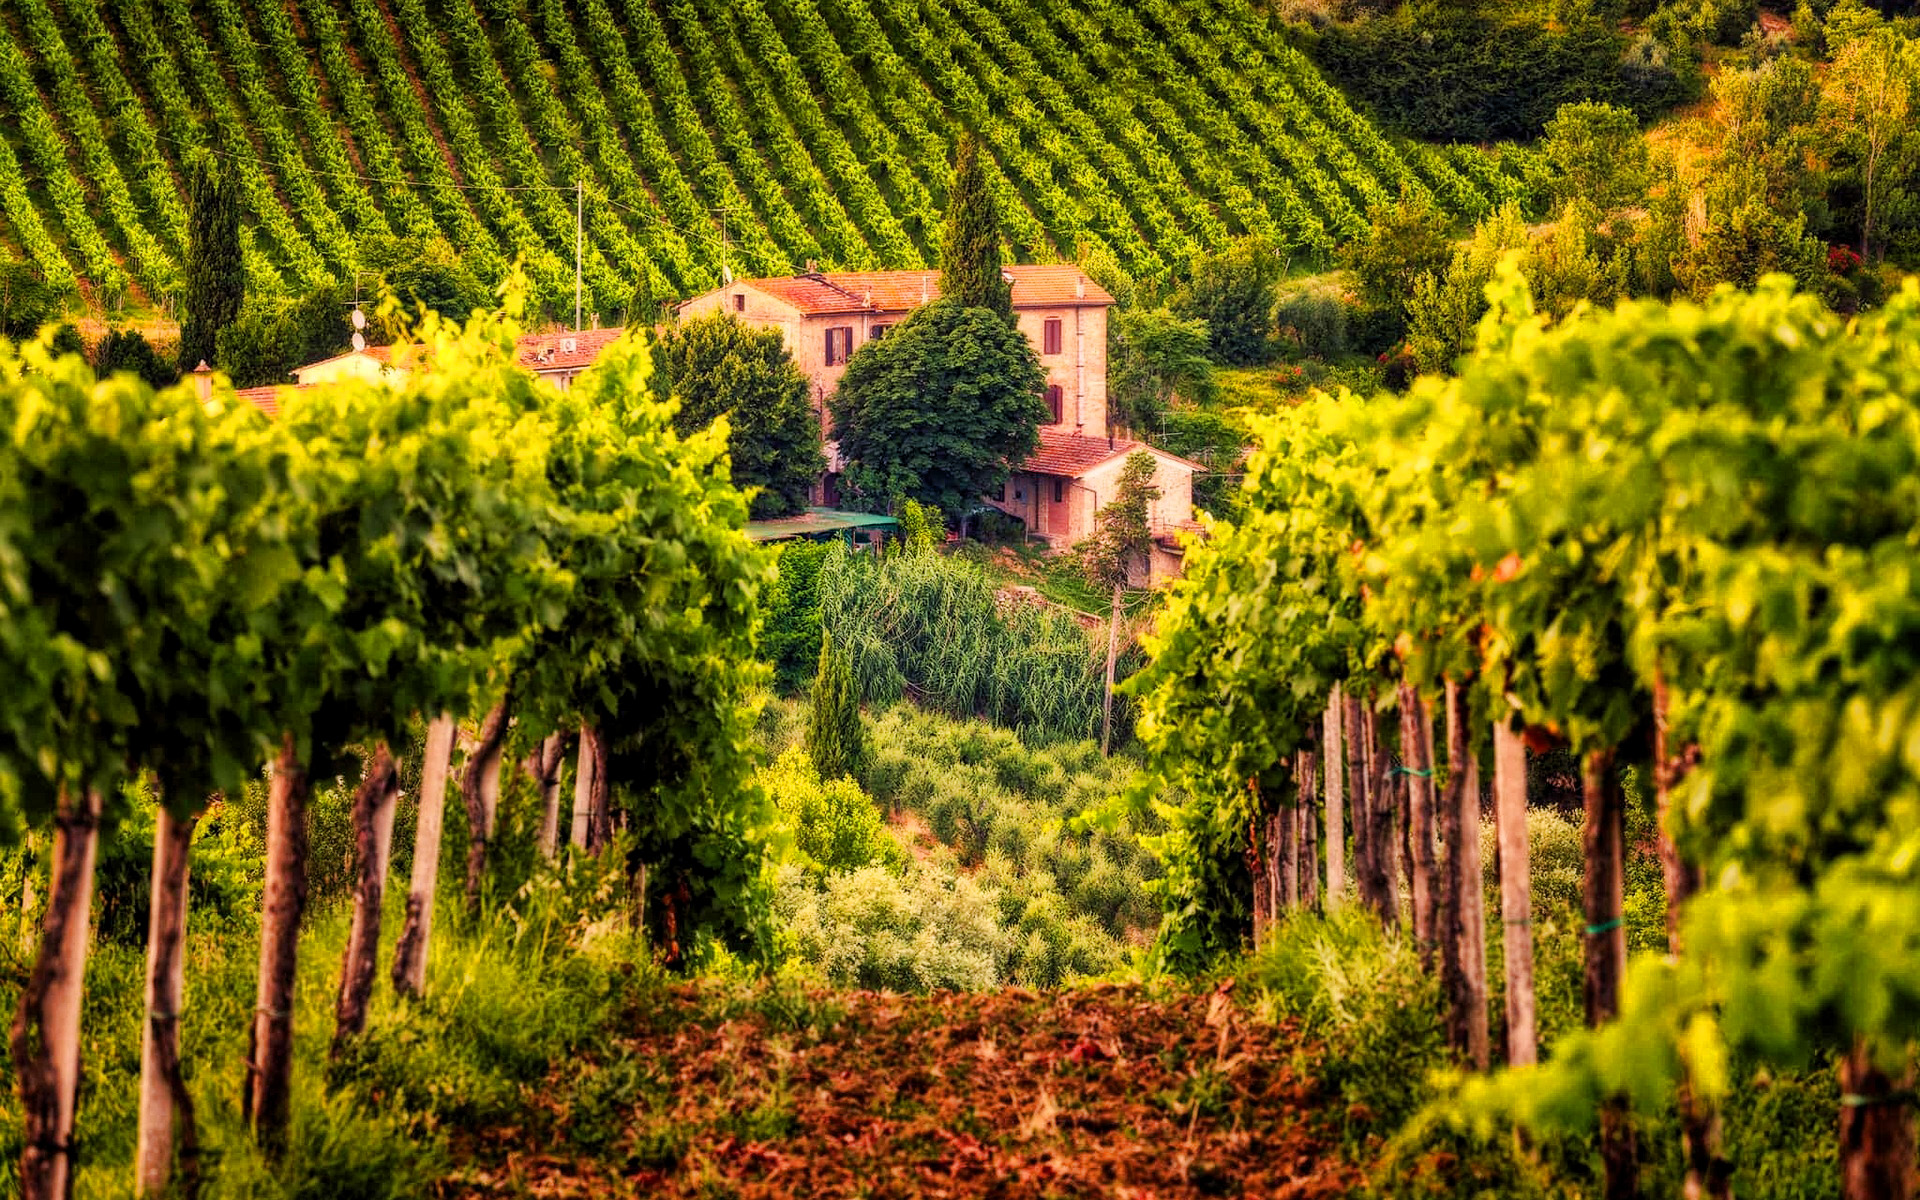 Download wallpaper Tuscany, HDR, vineyards, summer, Italy, beautiful nature, Europe for desktop with resolution 1920x1200. High Quality HD picture wallpaper